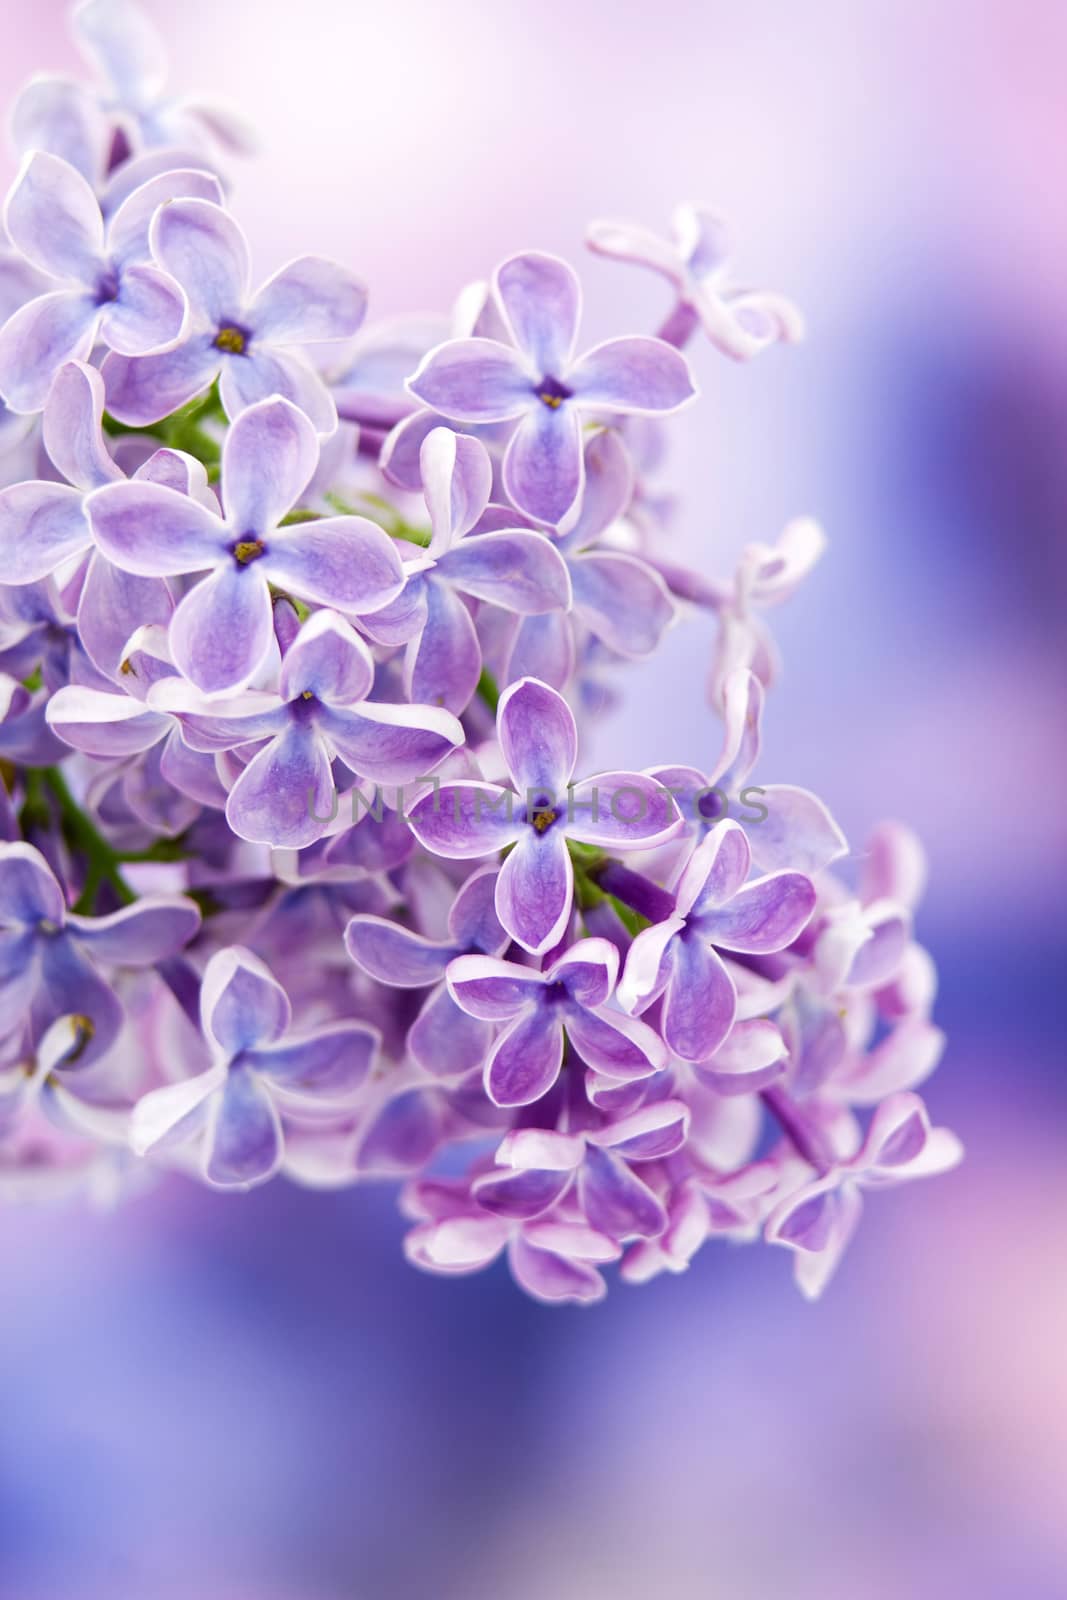 Blooming lilac flowers by miradrozdowski